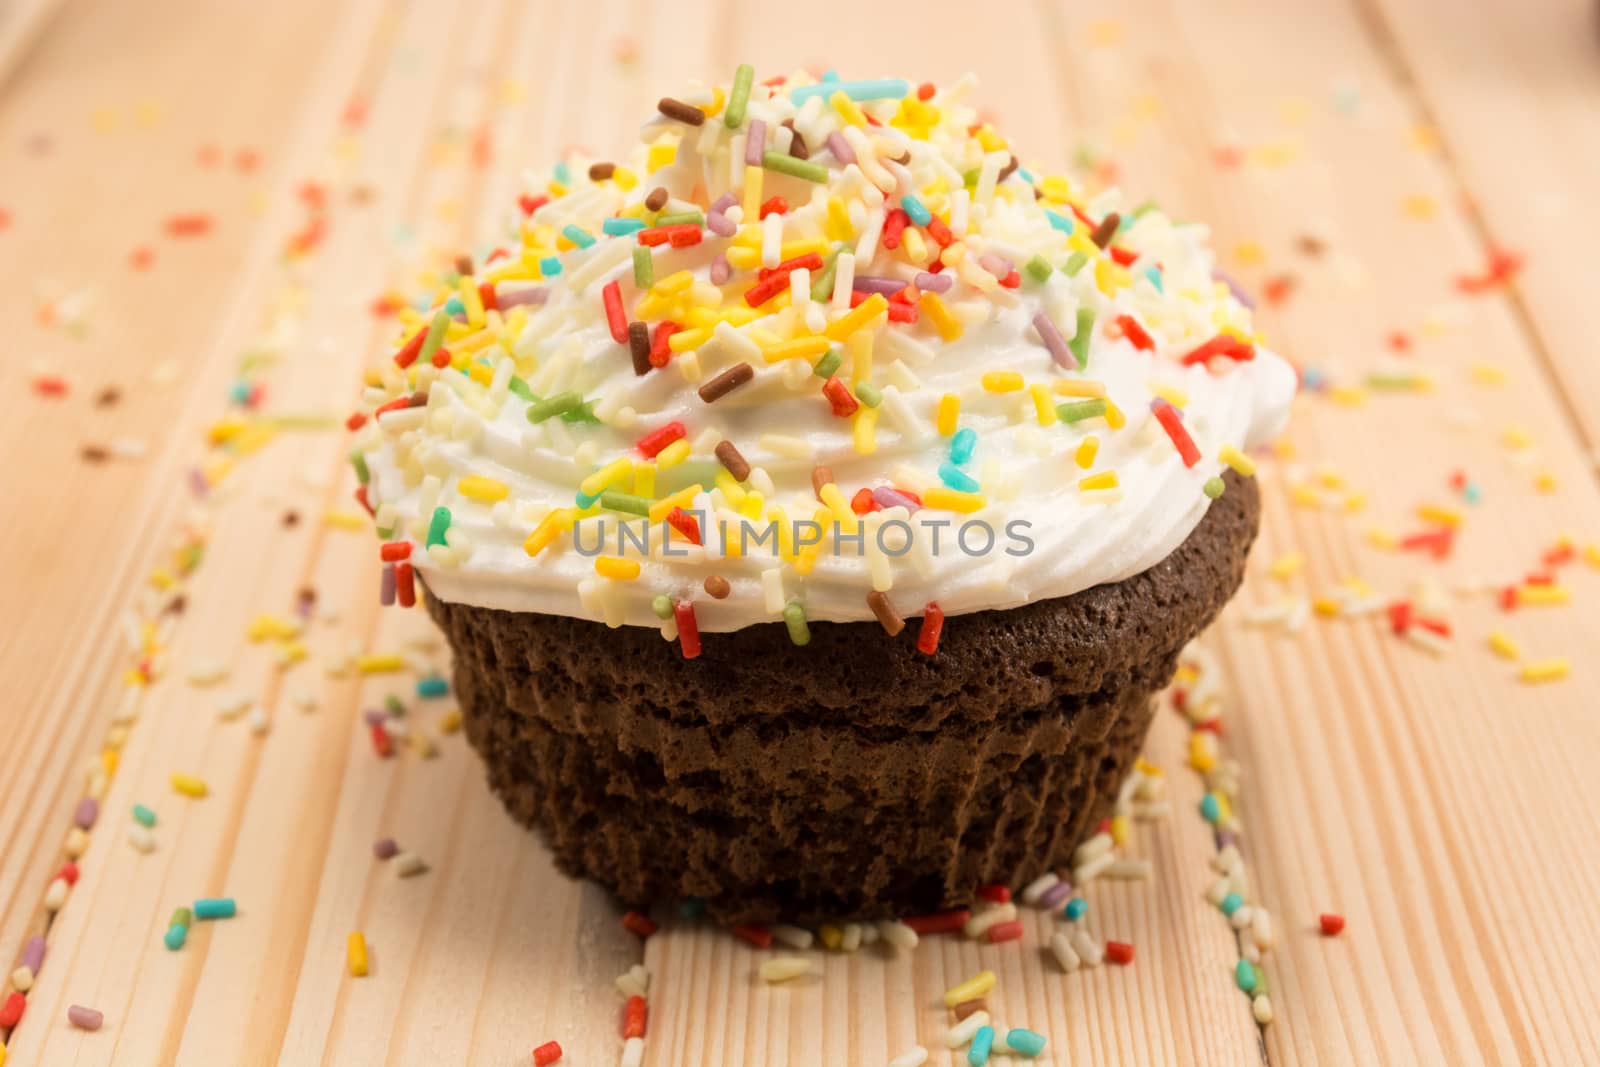 Muffin with cream and colorfull crumbs on top of it sitting on bright wooden table